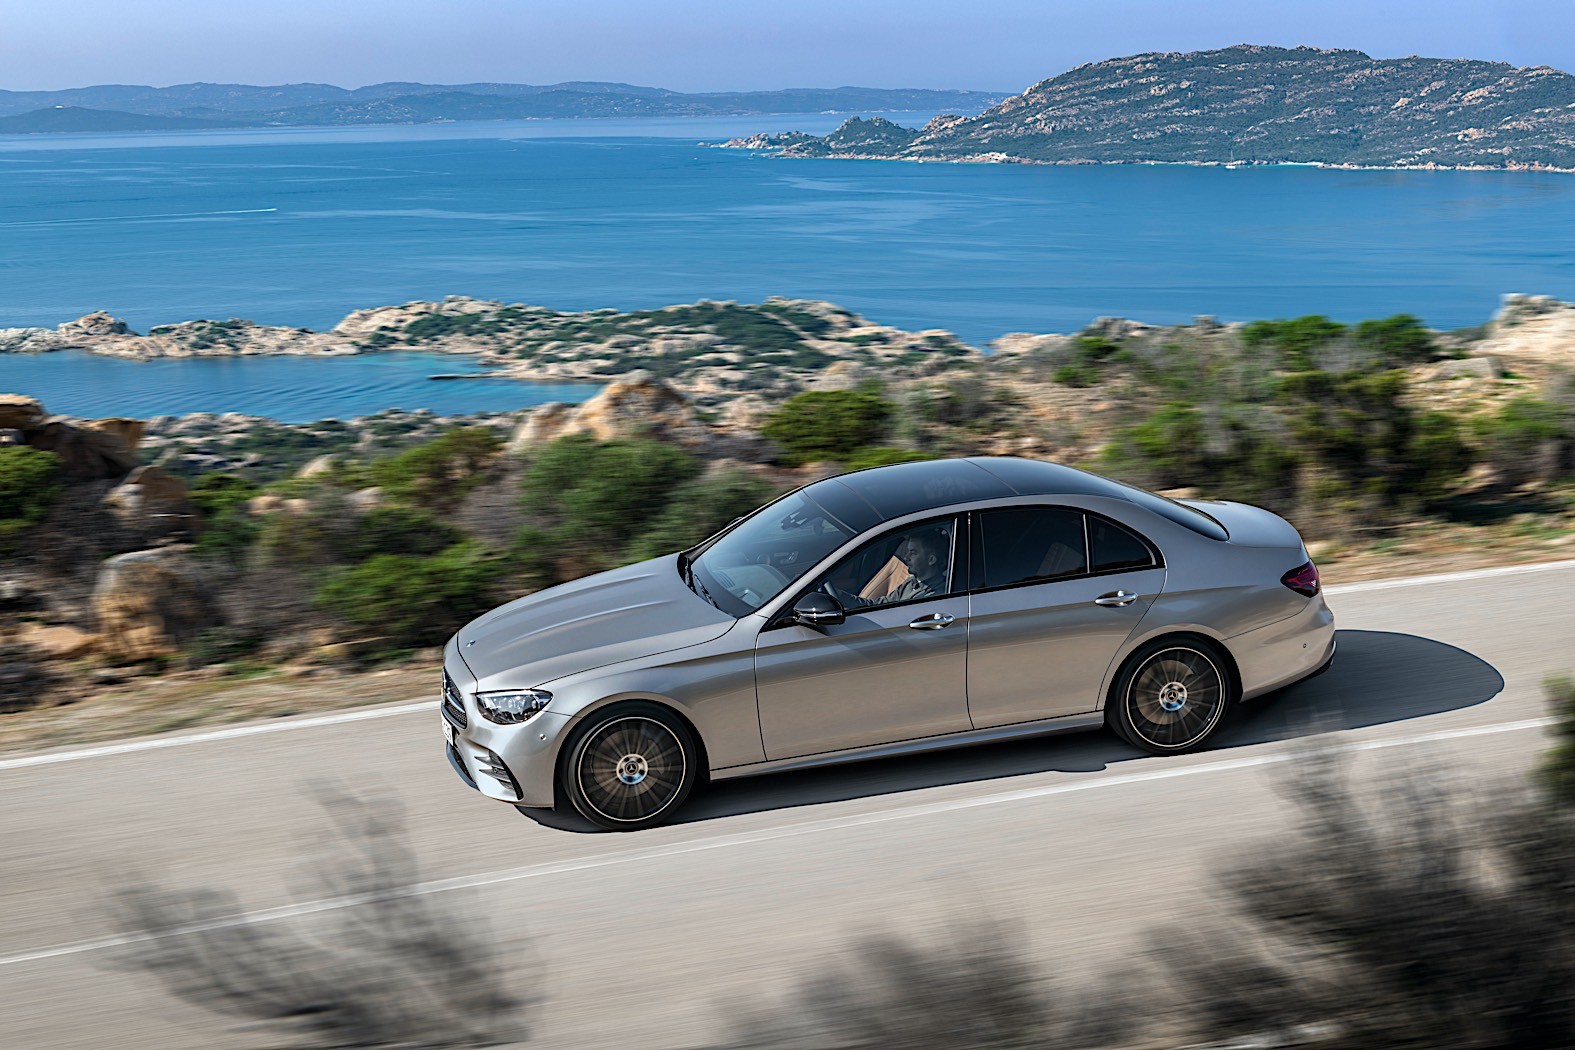 2021 Mercedes-Benz E-Class Unwrapped, Coming to the U.S. in Electrified